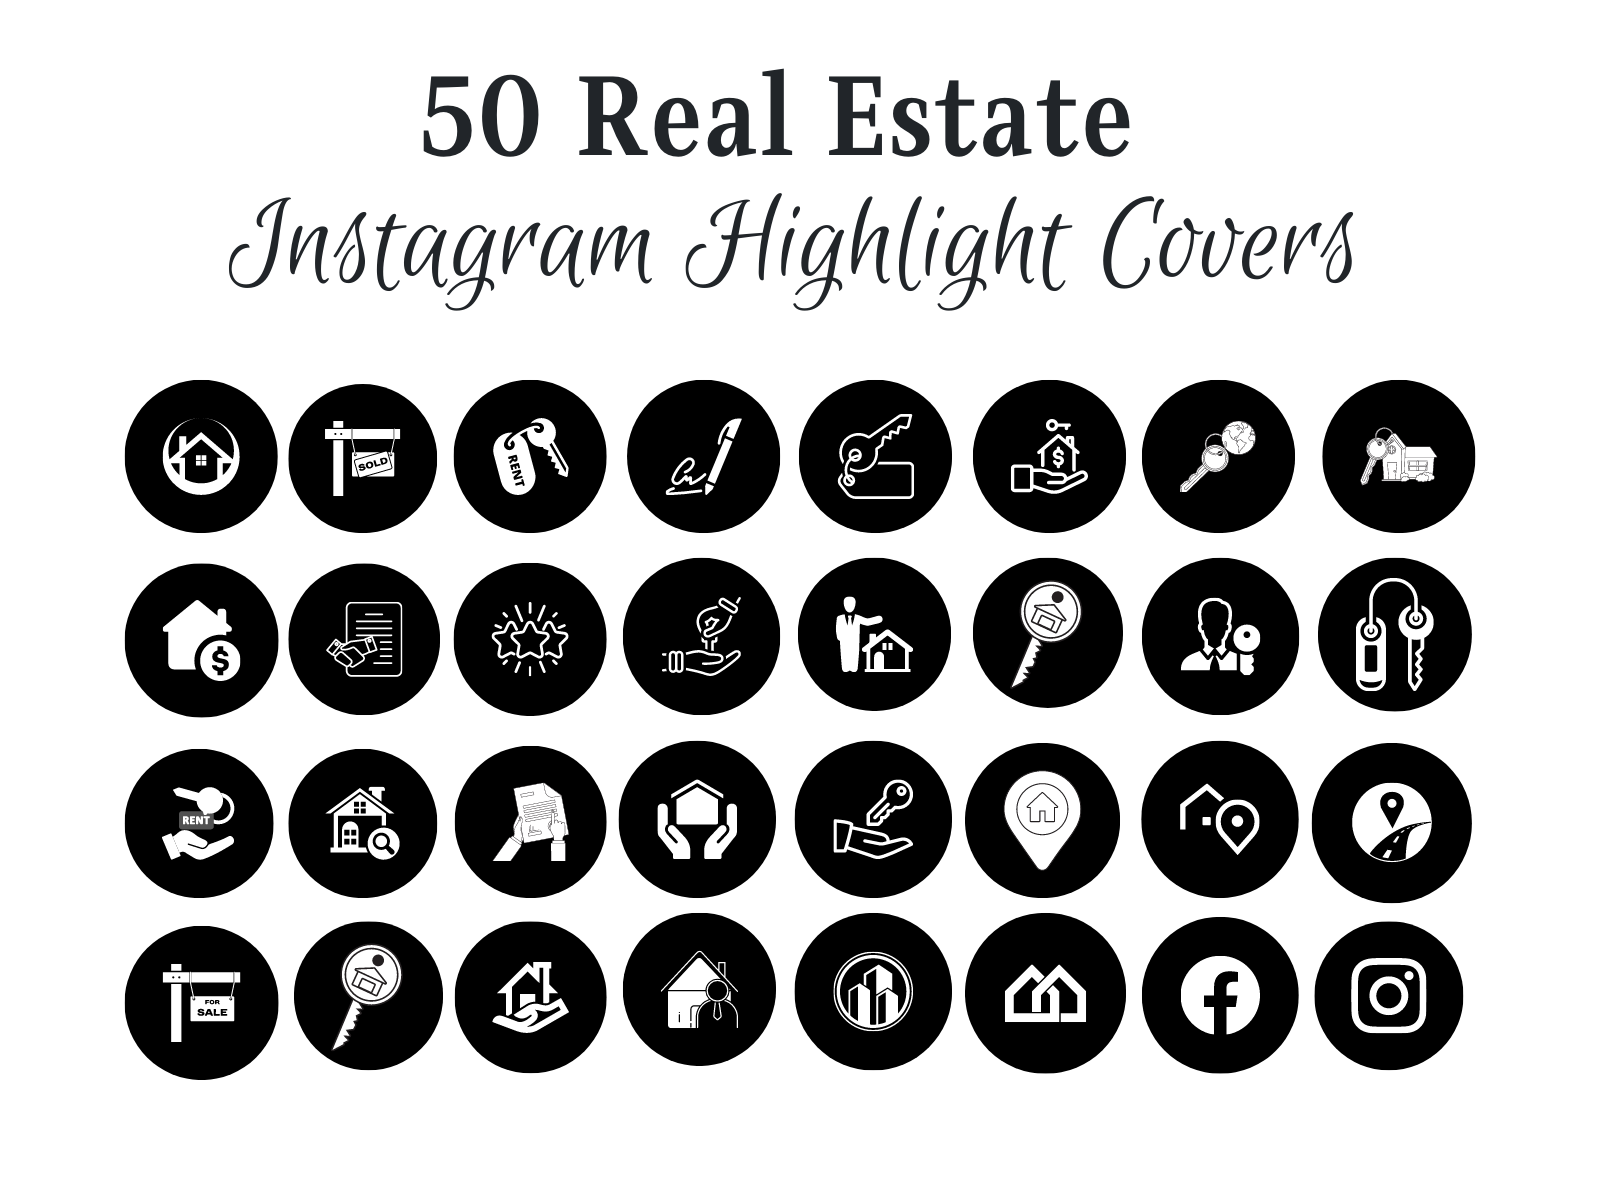 Instagram Highlight Covers For Realtors by Kelly Smith on Dribbble